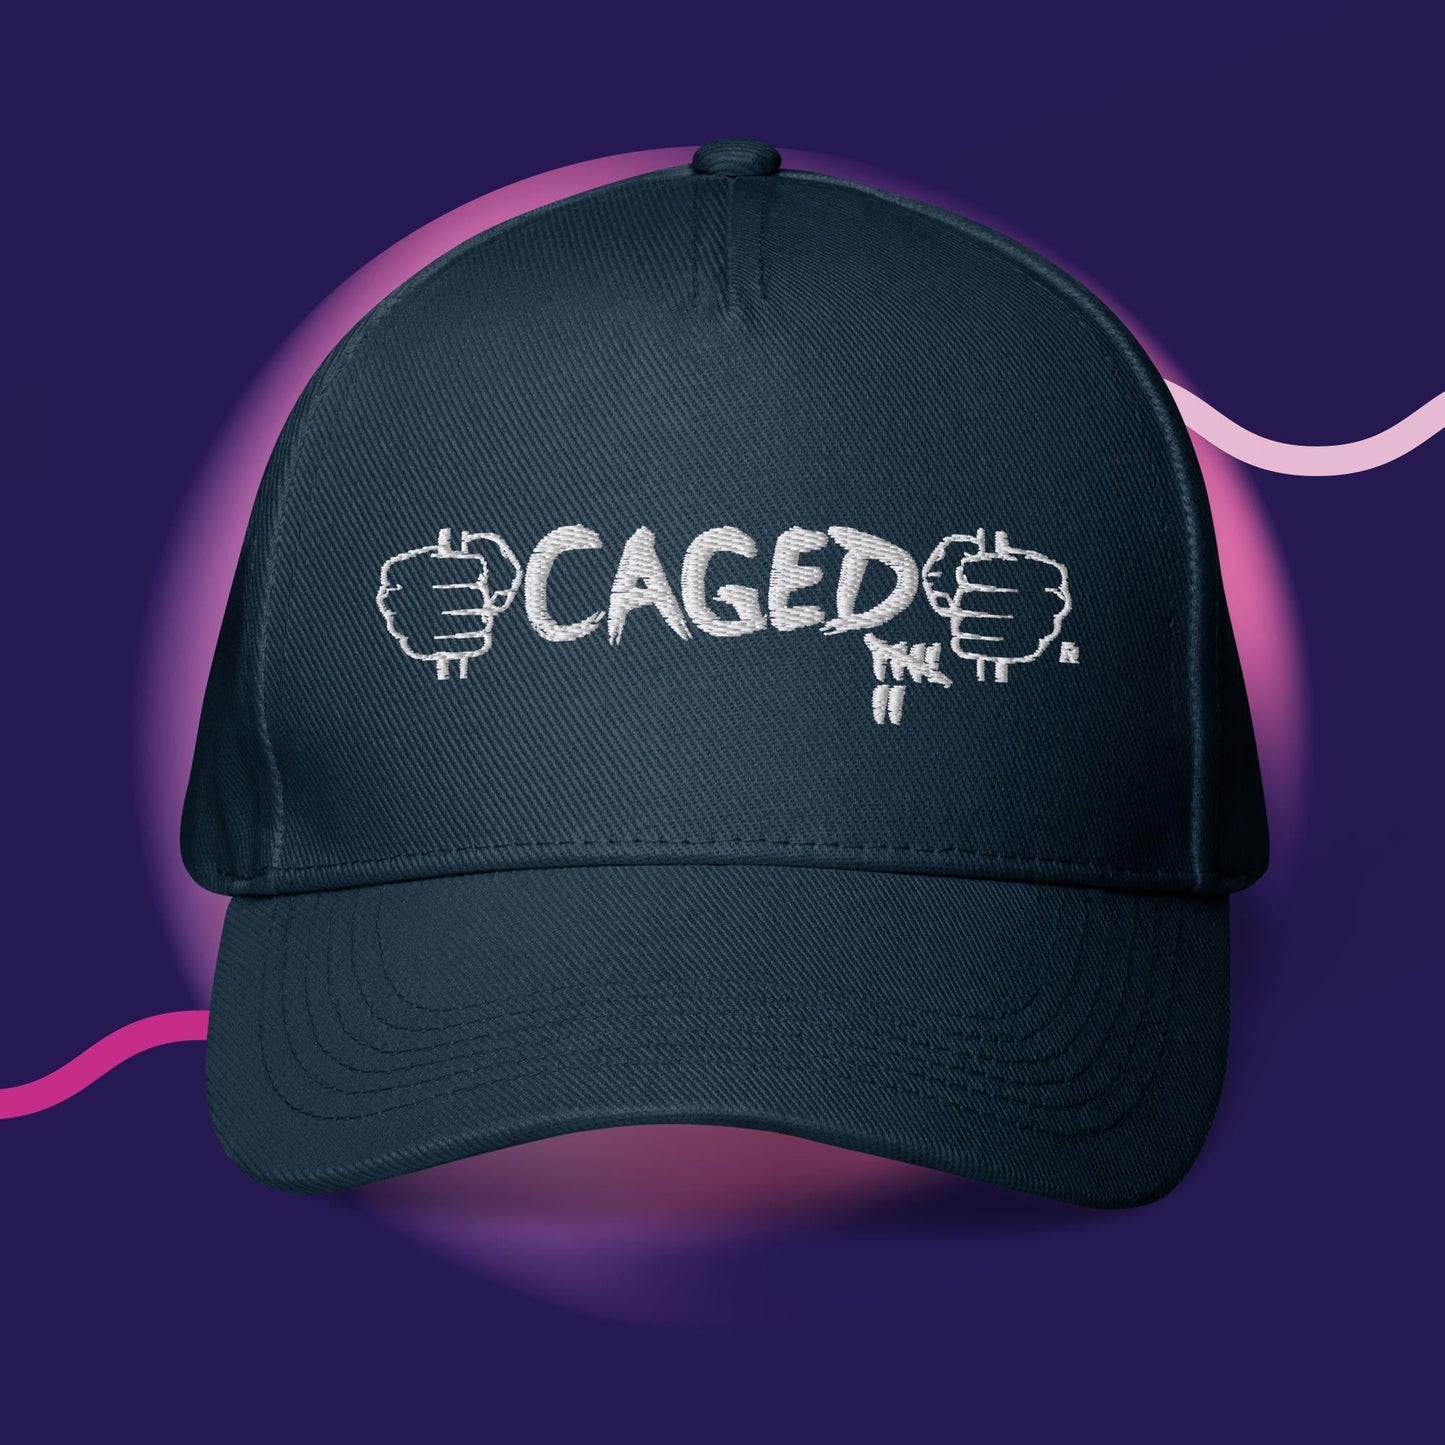 Caged-Life Classic baseball cap CAGED-LIFE, Streetwear 